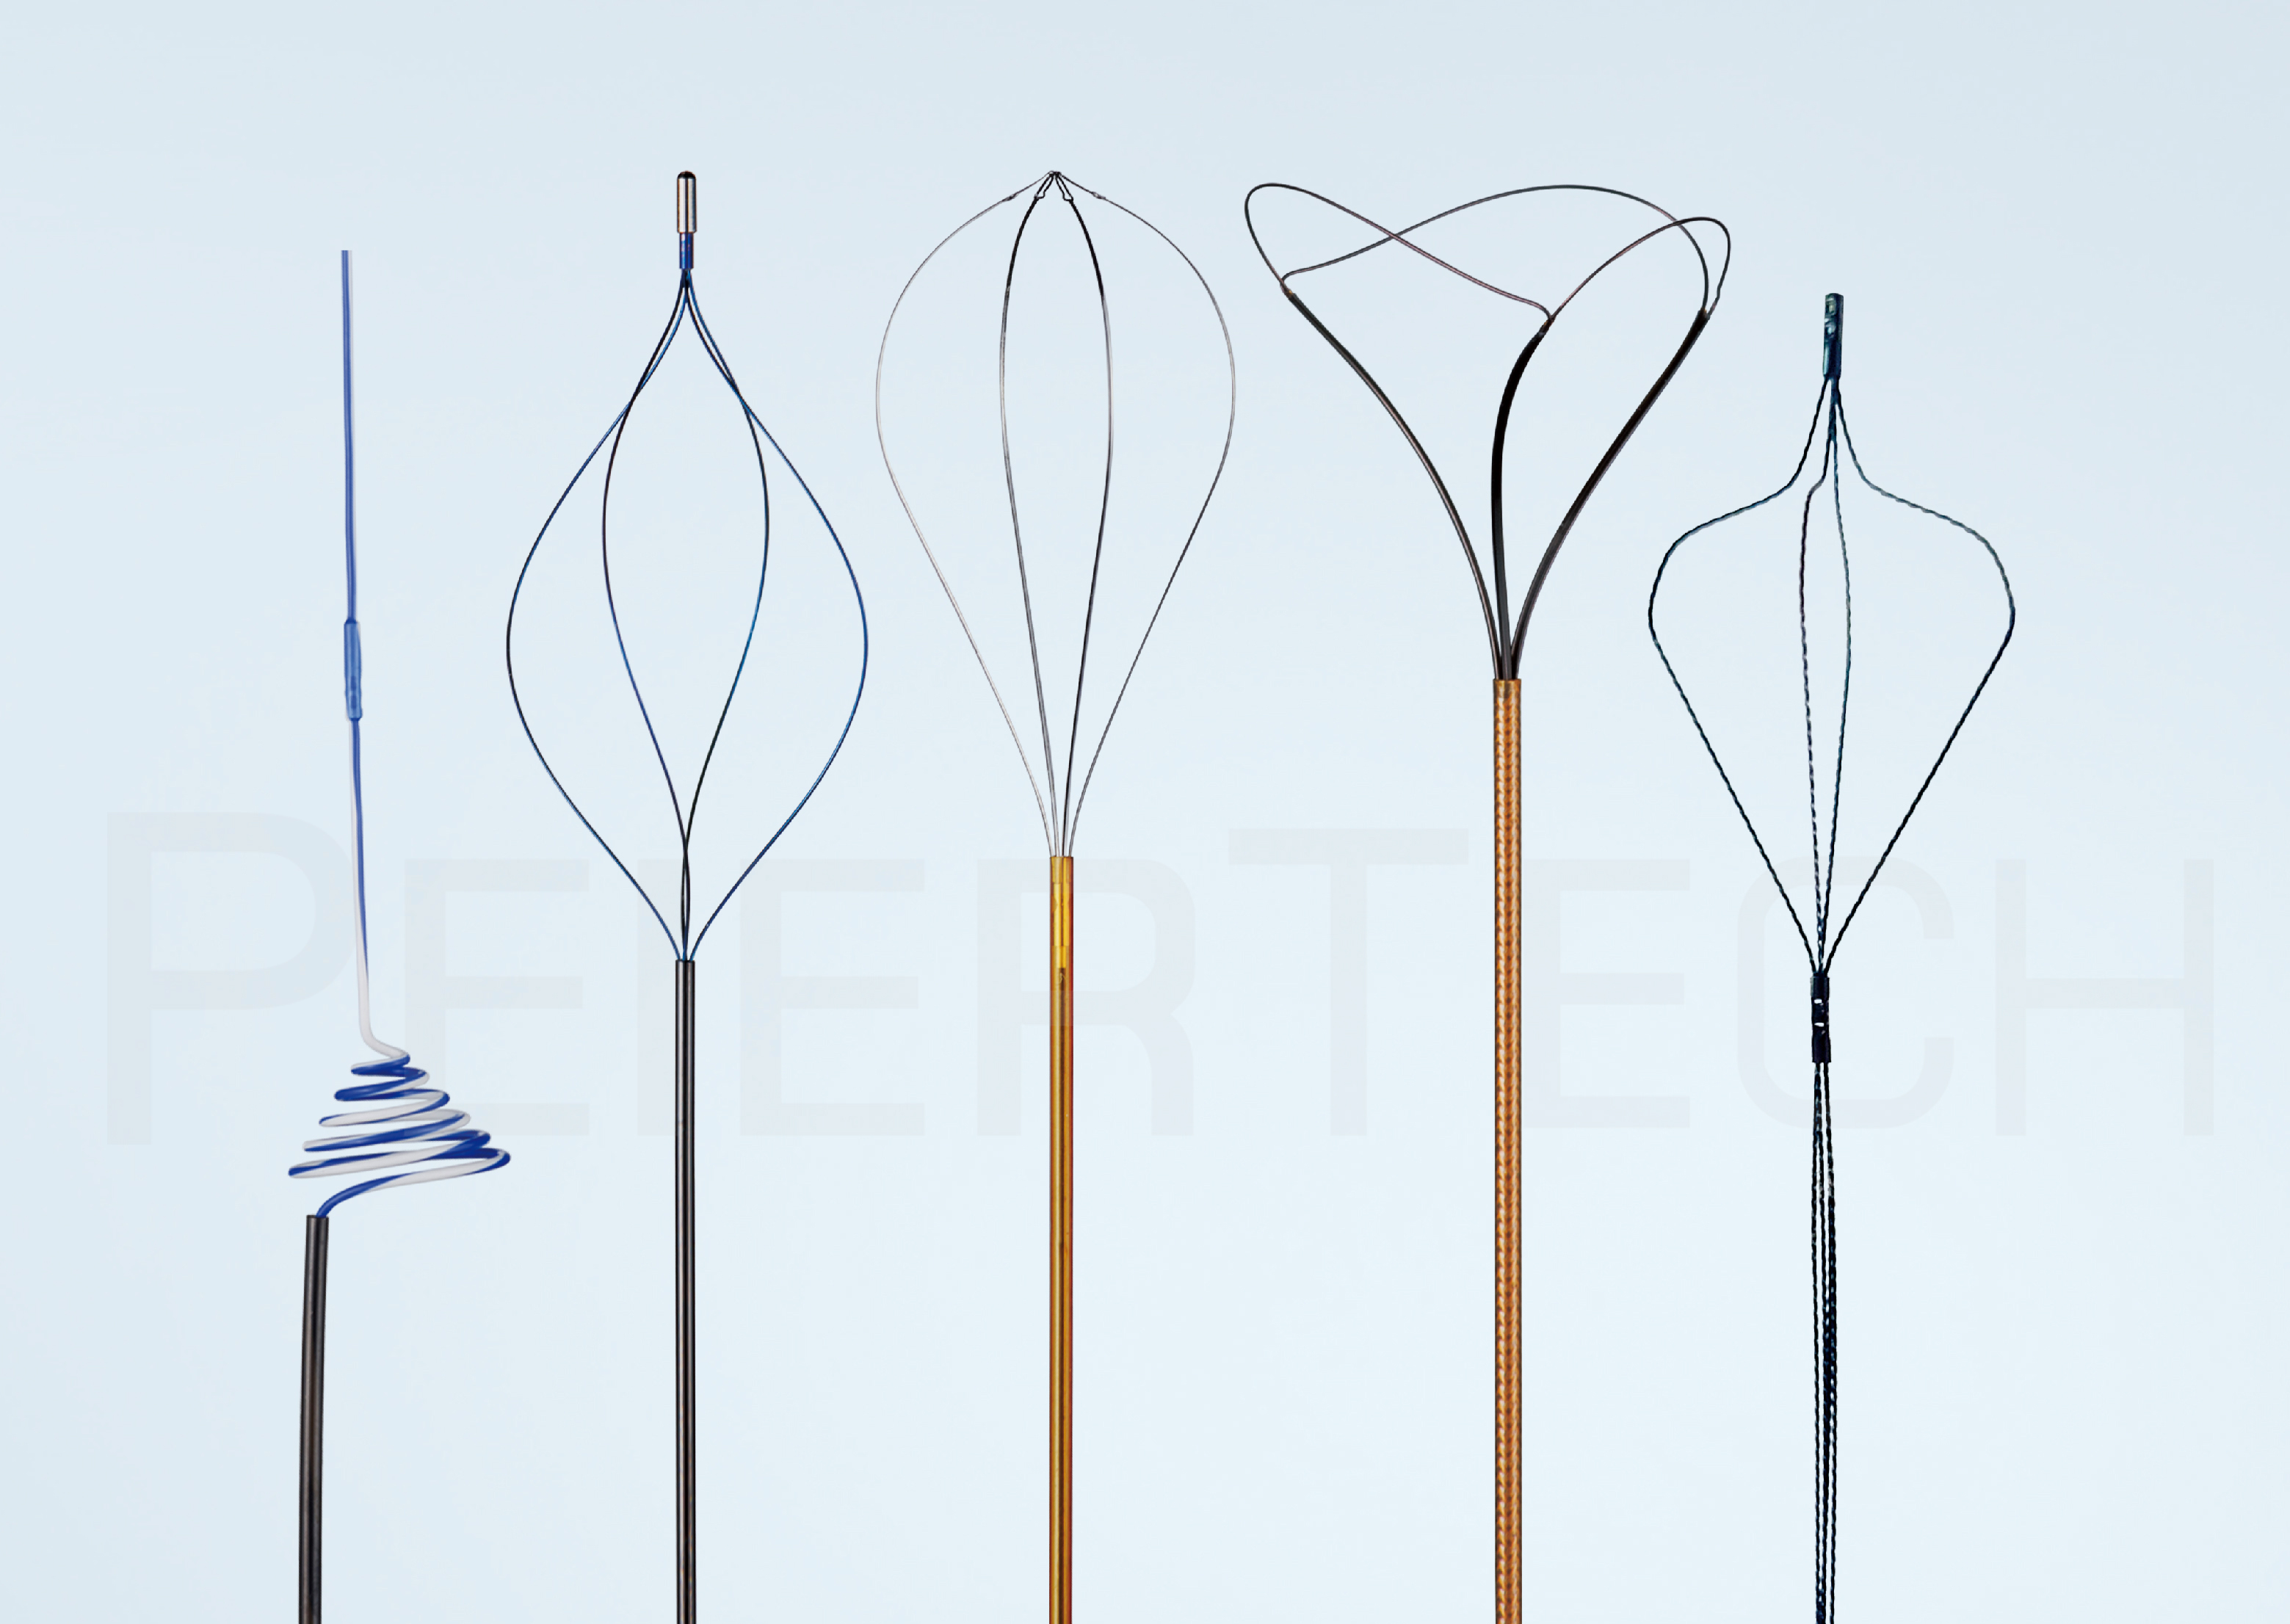 Nitinol Devices Components 